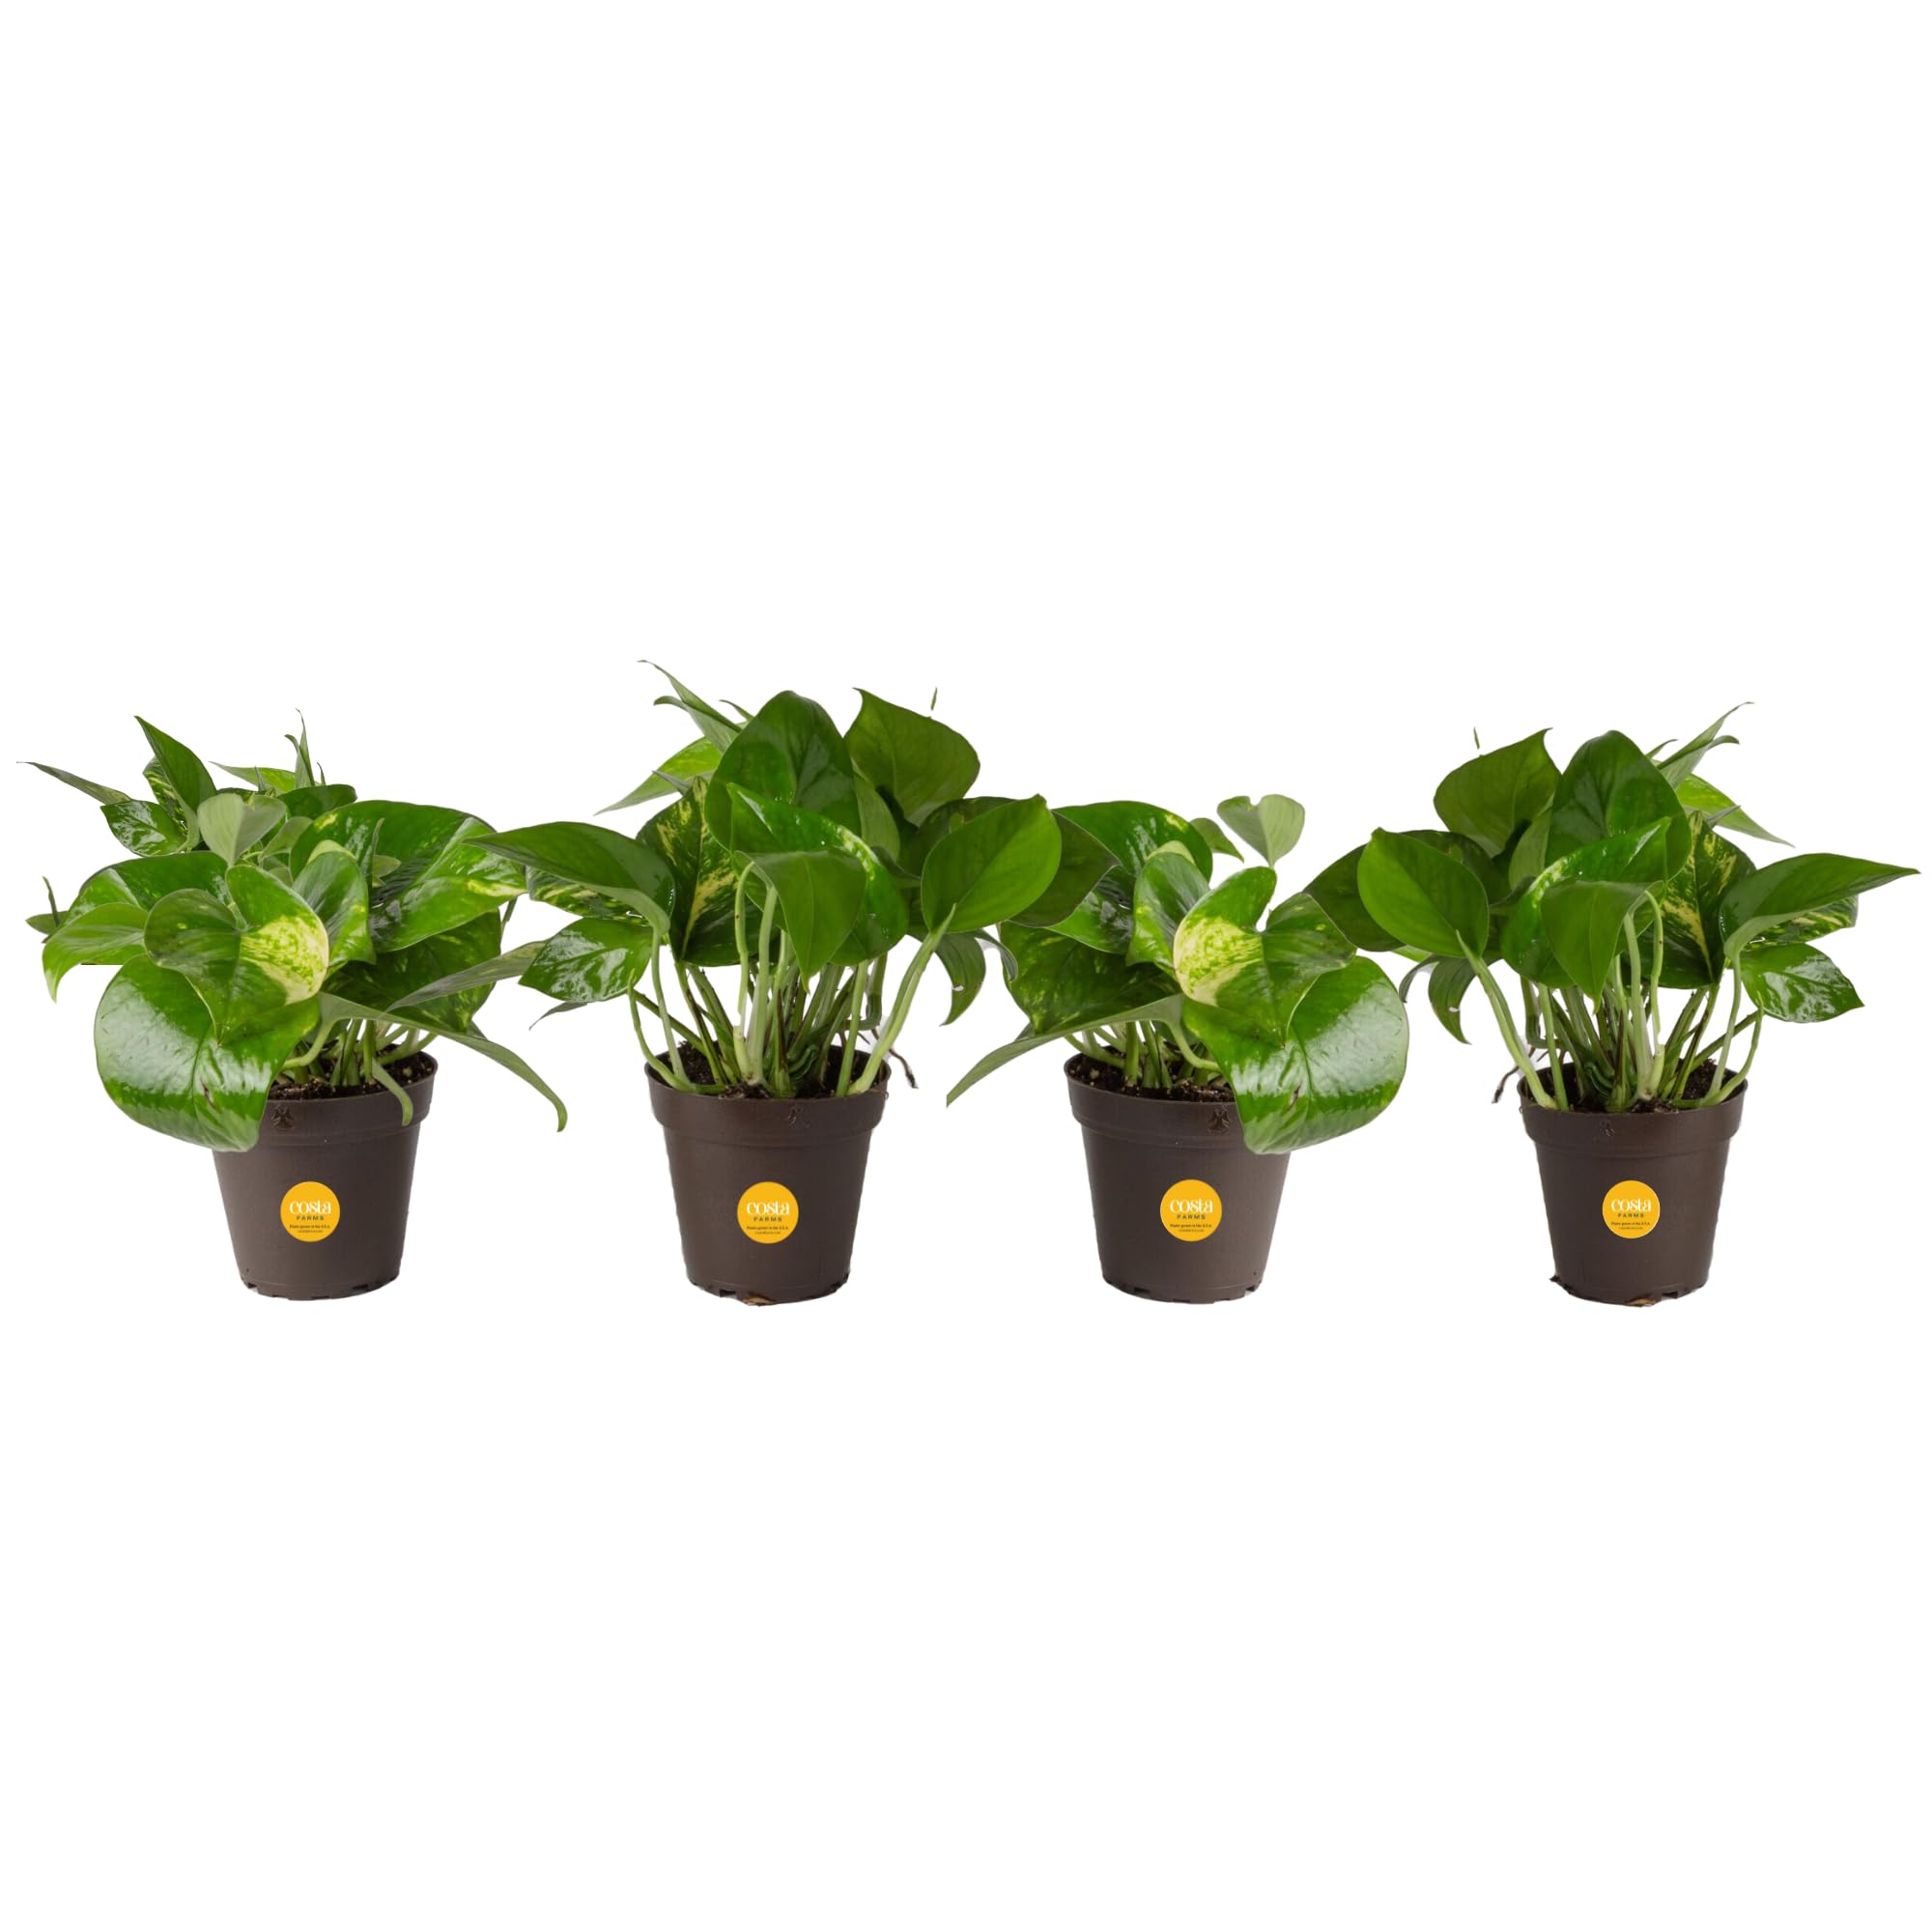 4-Count Costa Farms 4" Easy Care Devil's Ivy Pothos Live Indoor House Plant $22.69 + Free Shipping w/ Prime or on $35+